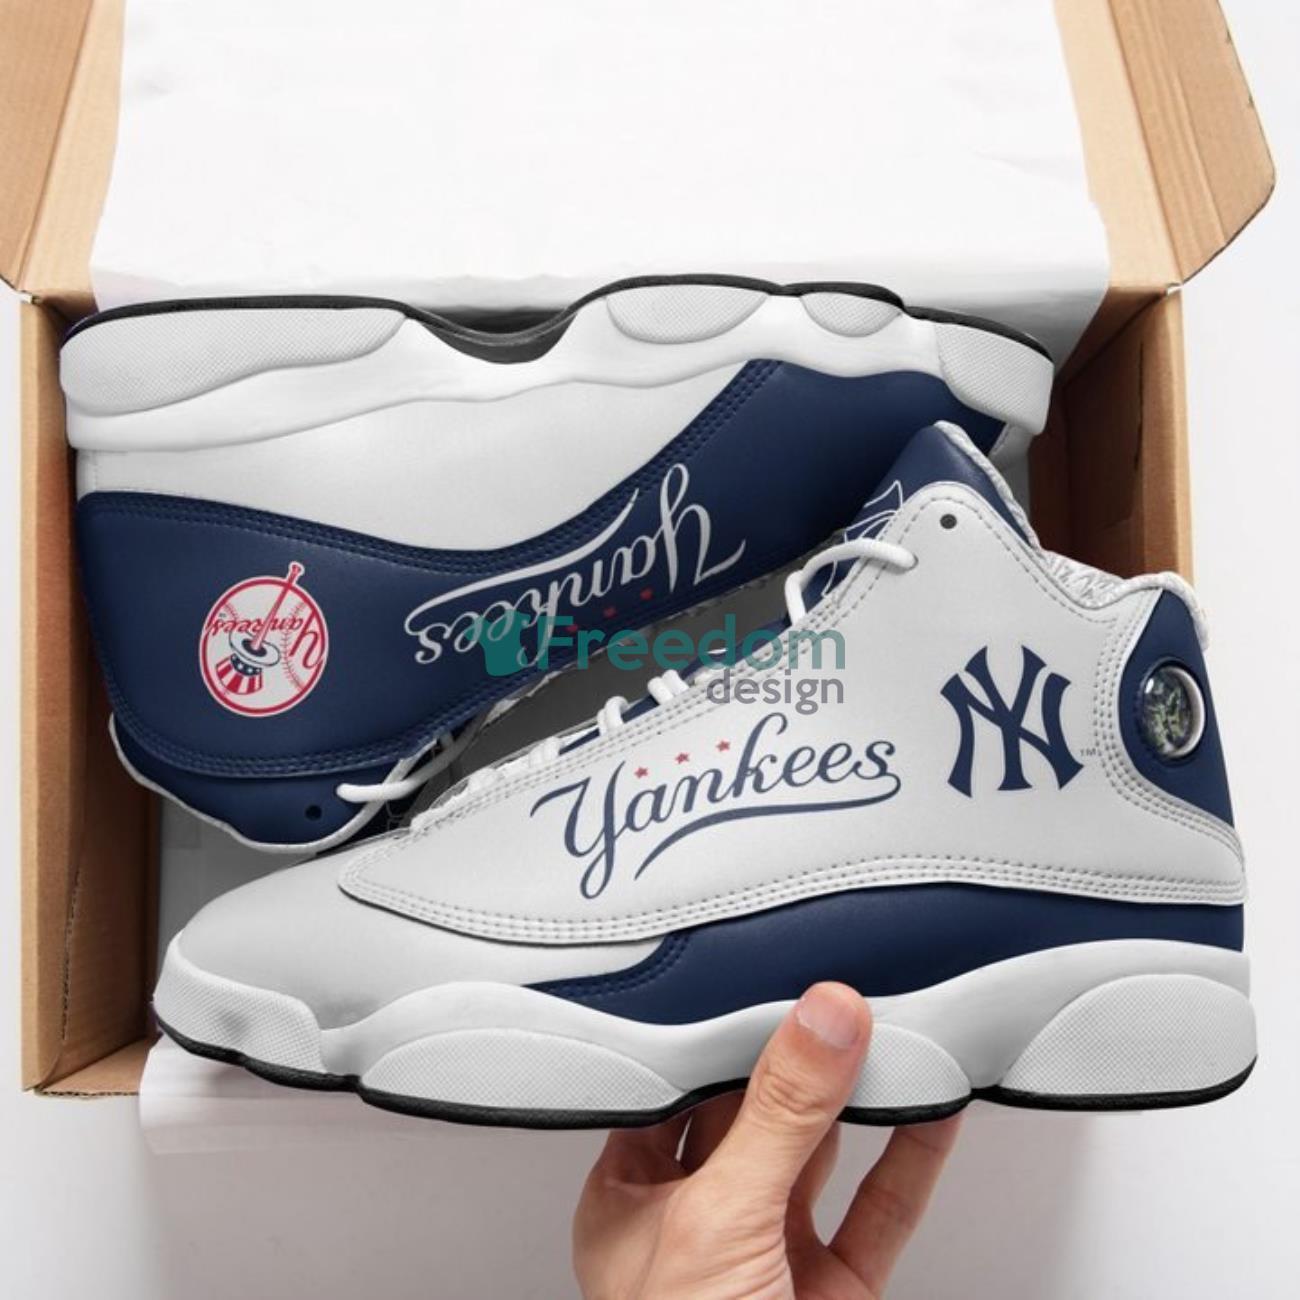 Mlb New York Yankees Air Jordan 13 Shoe For Baseball Lovers New Design8 -  The Clothes You'll Ever Need